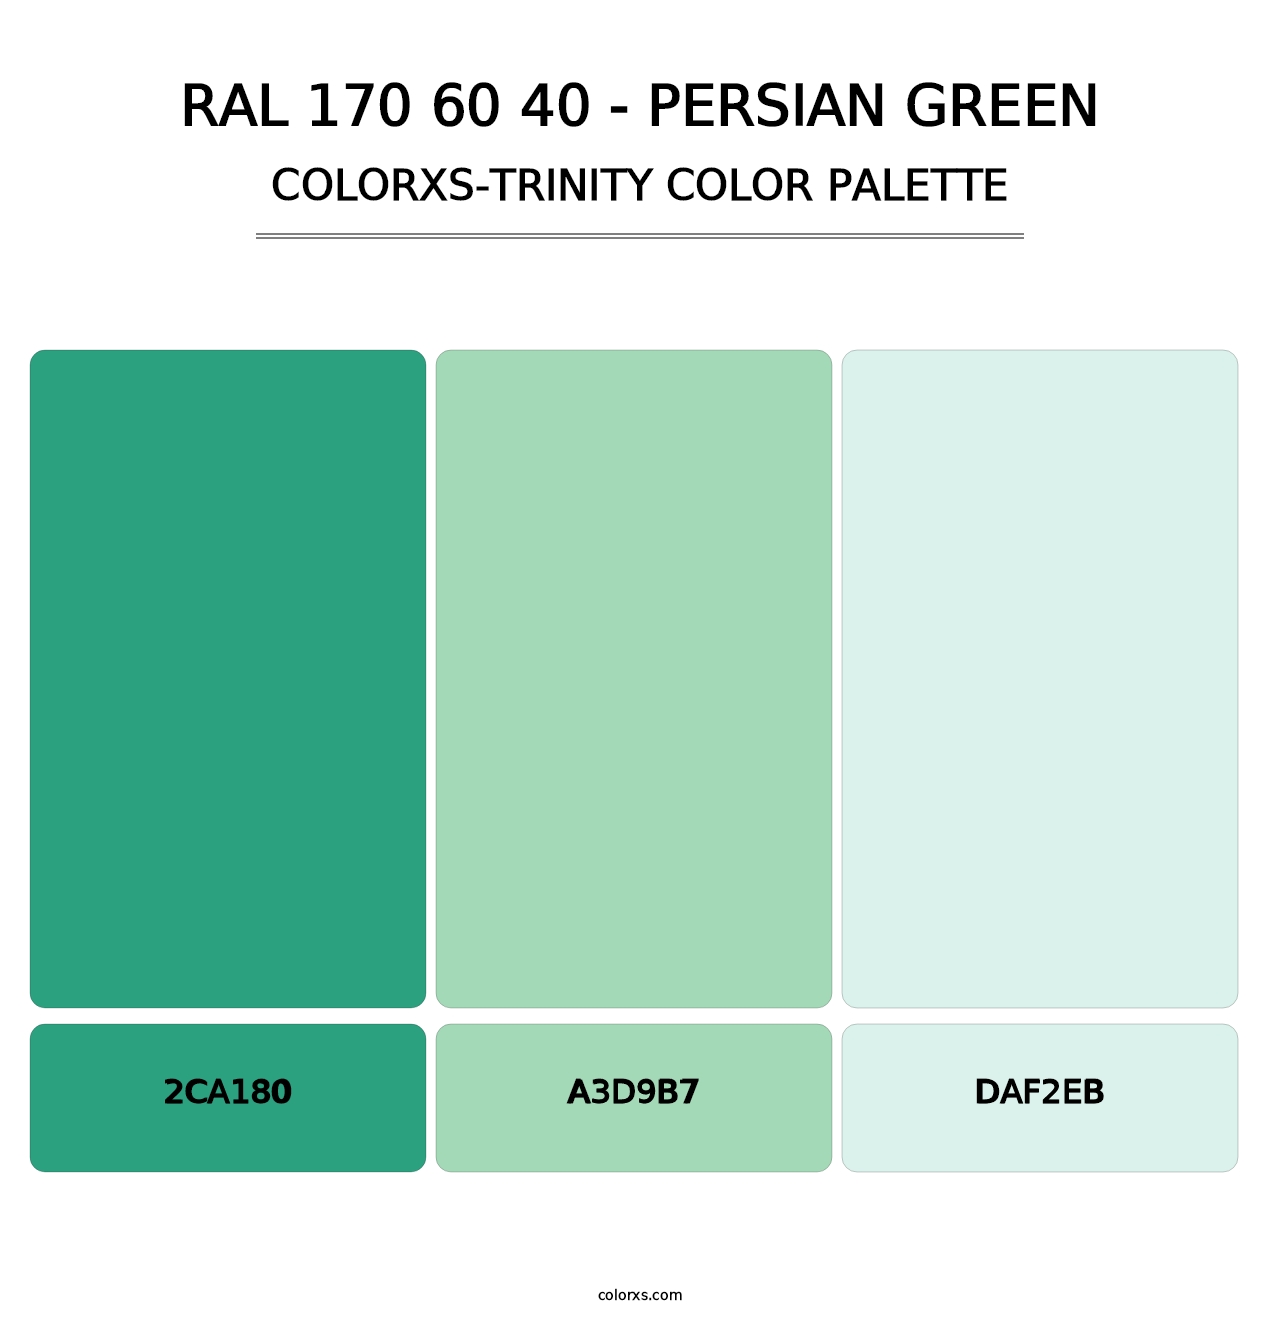 RAL 170 60 40 - Persian Green - Colorxs Trinity Palette